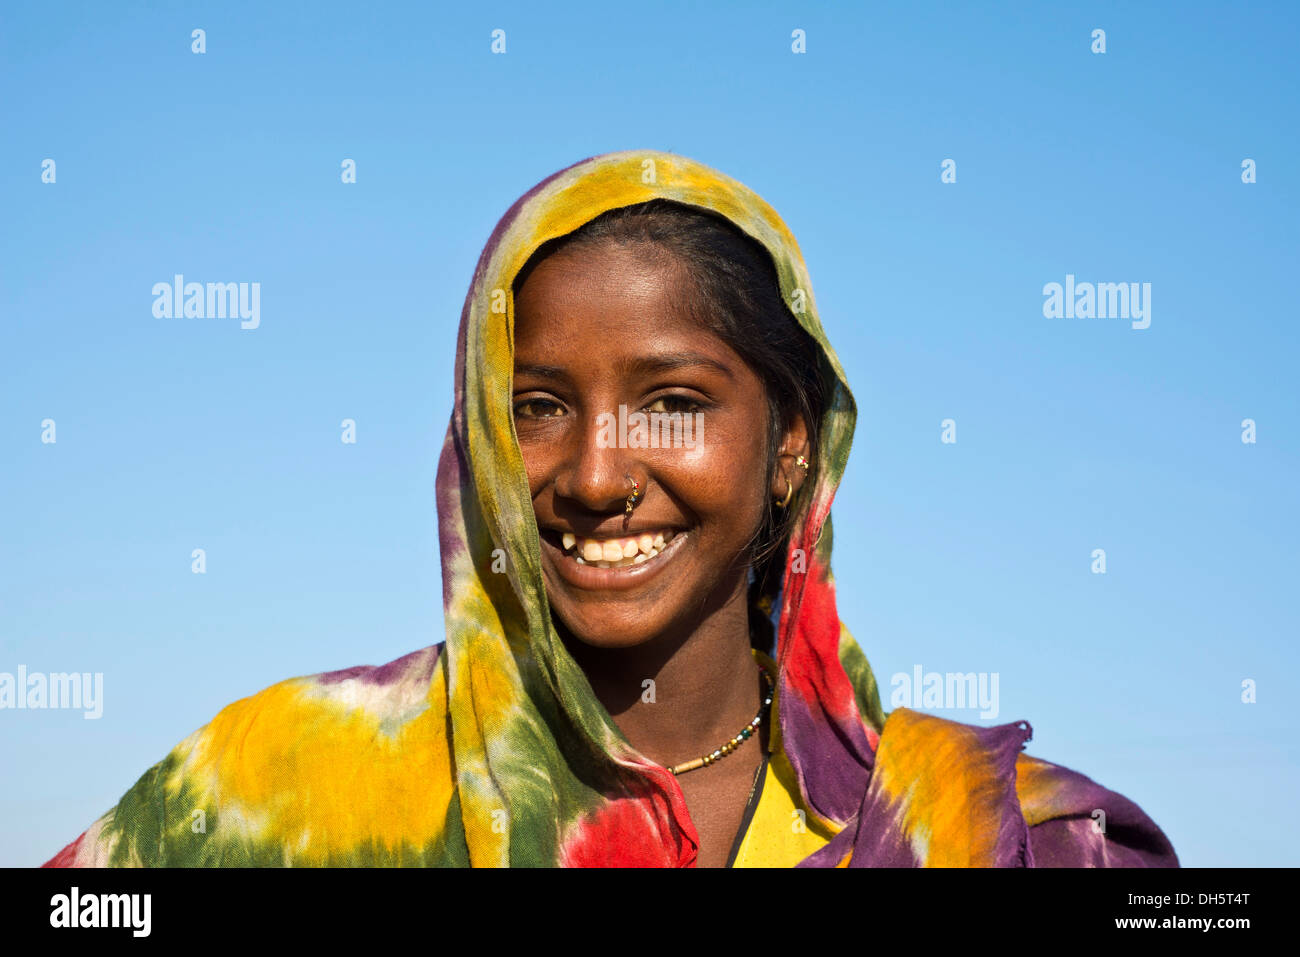 Young Indian woman with colourful scarf, portrait, Pushkar, Rajasthan, India Stock Photo